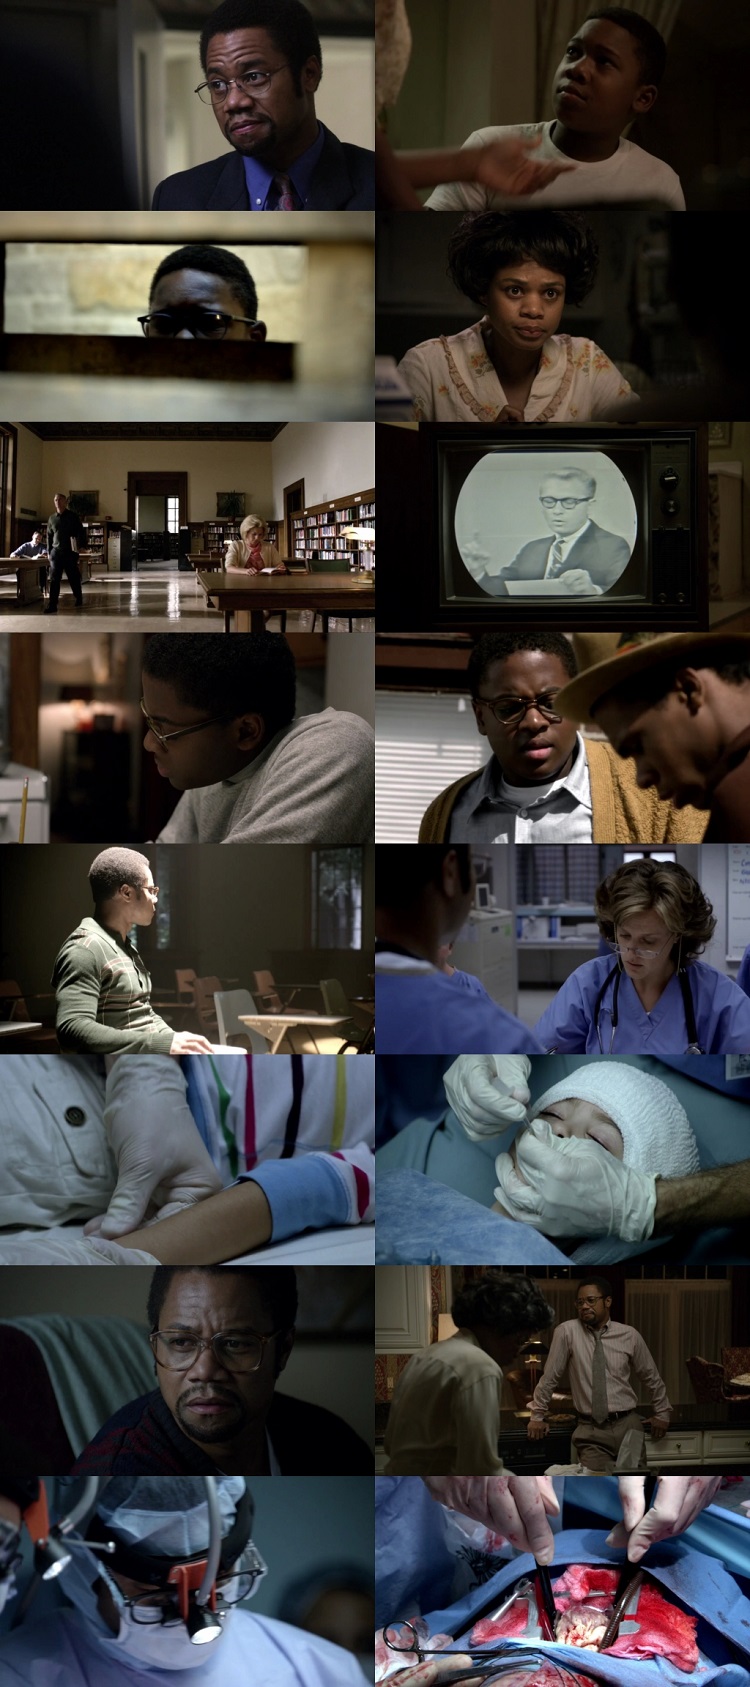 Gifted Hands The Ben Carson Story 2009 Hindi Dual Audio 1080p 720p 480p Web-DL ESubs HEVC